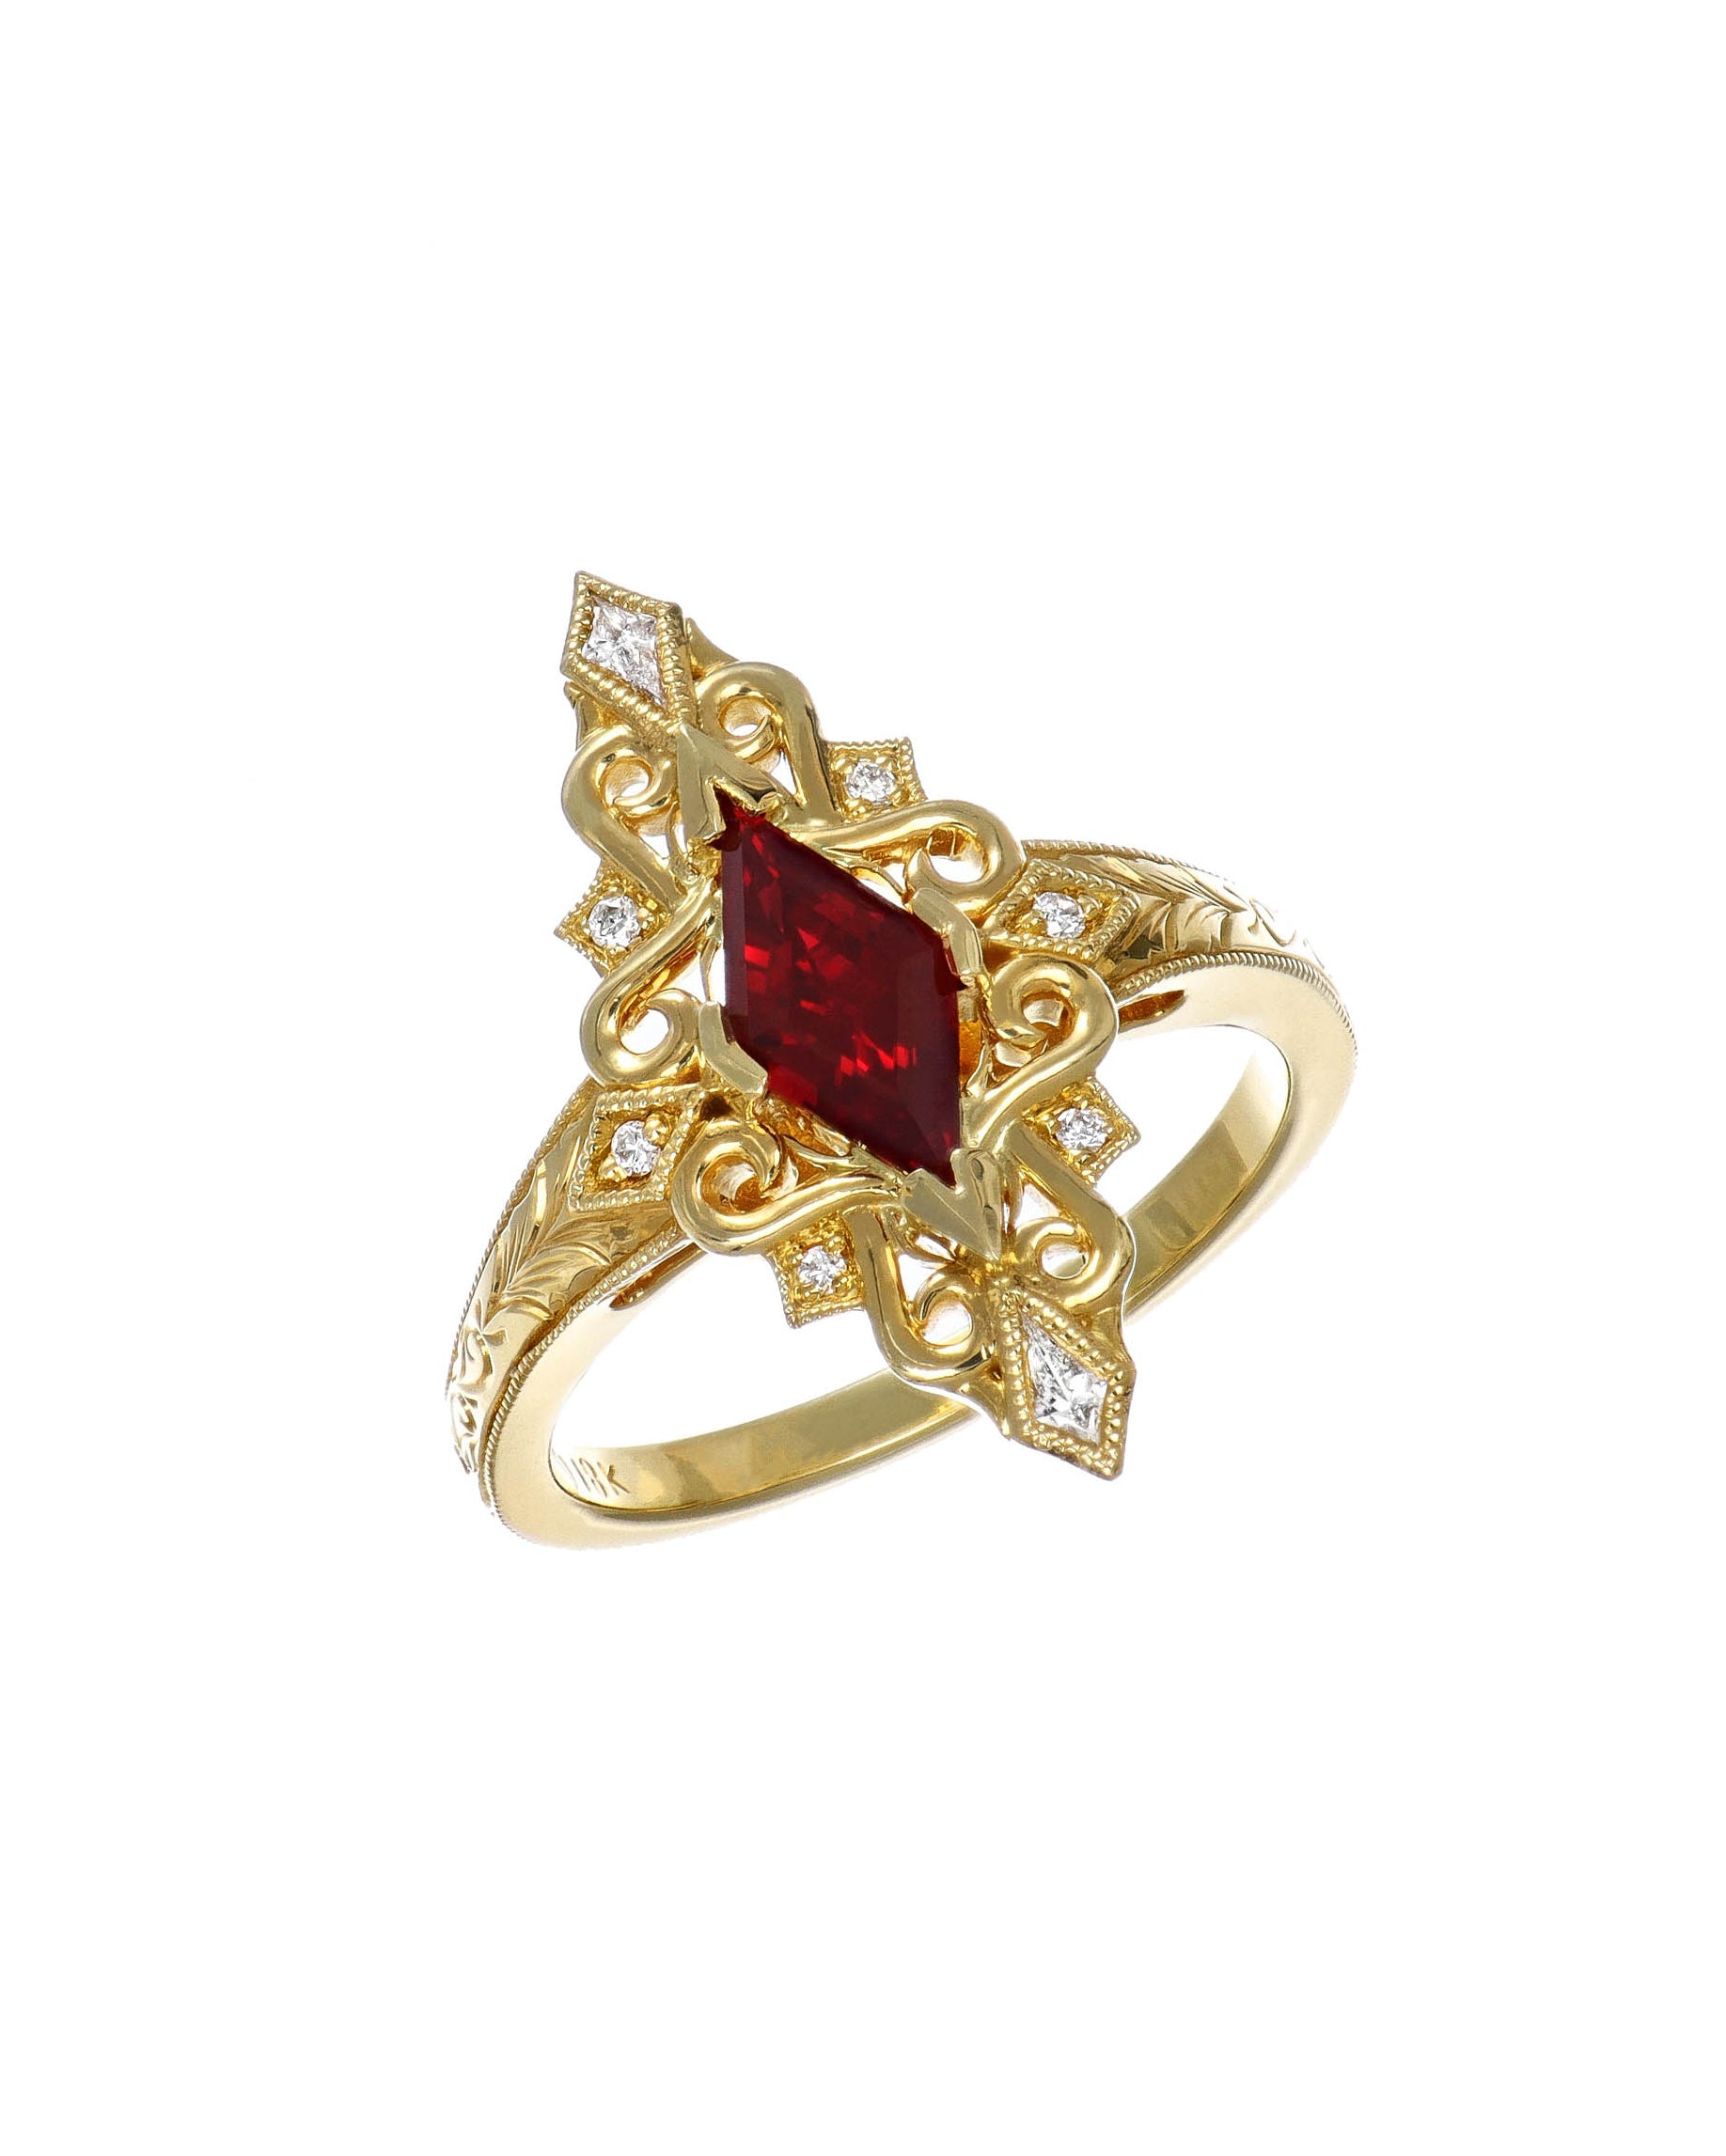 Gothic Inspired Ruby Cocktail Ring